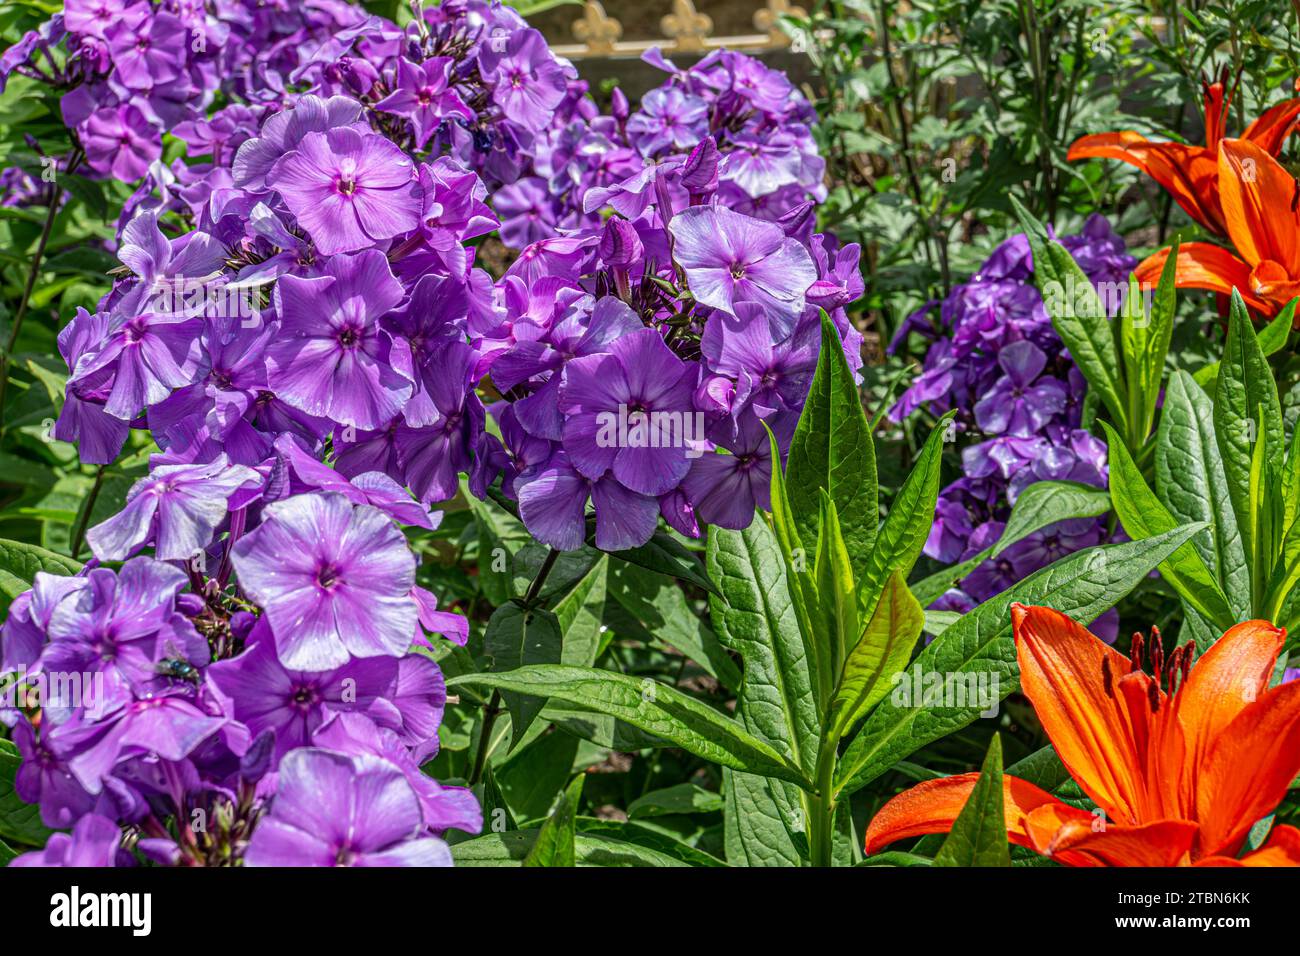 Garden Phlox paniculata, flowers of purple color, also known as the moss phlox. Stock Photo